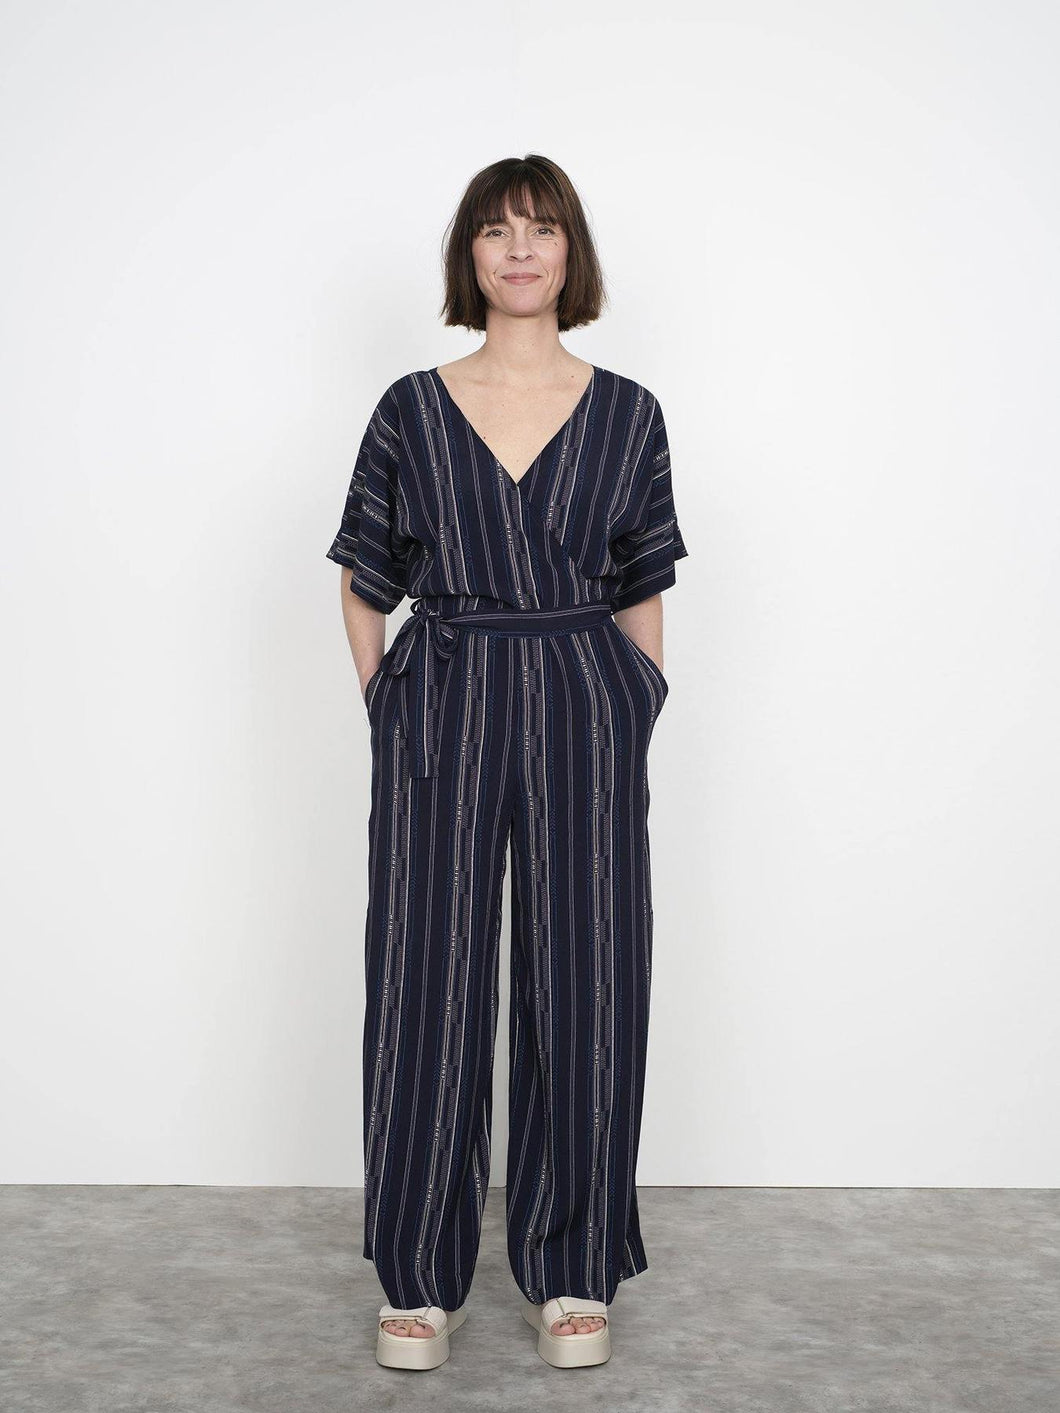 Wide-Leg Jumpsuit by The Assembly Line